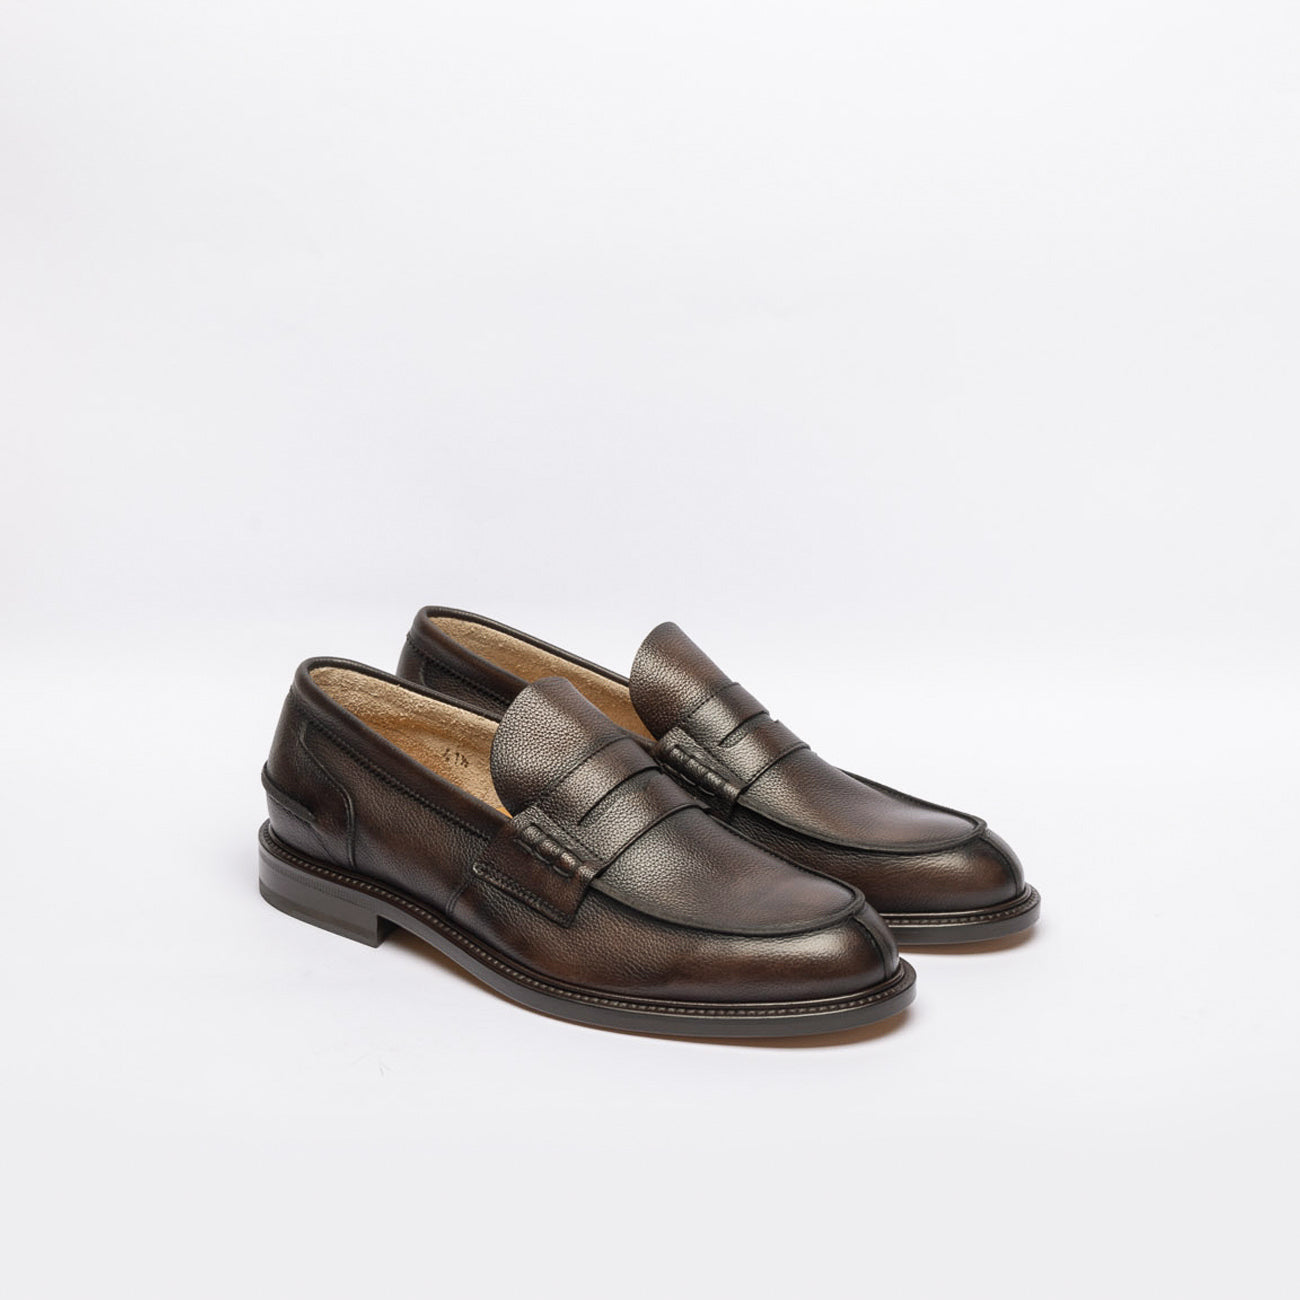 Borghini 784 brown hammered leather penny loafer.